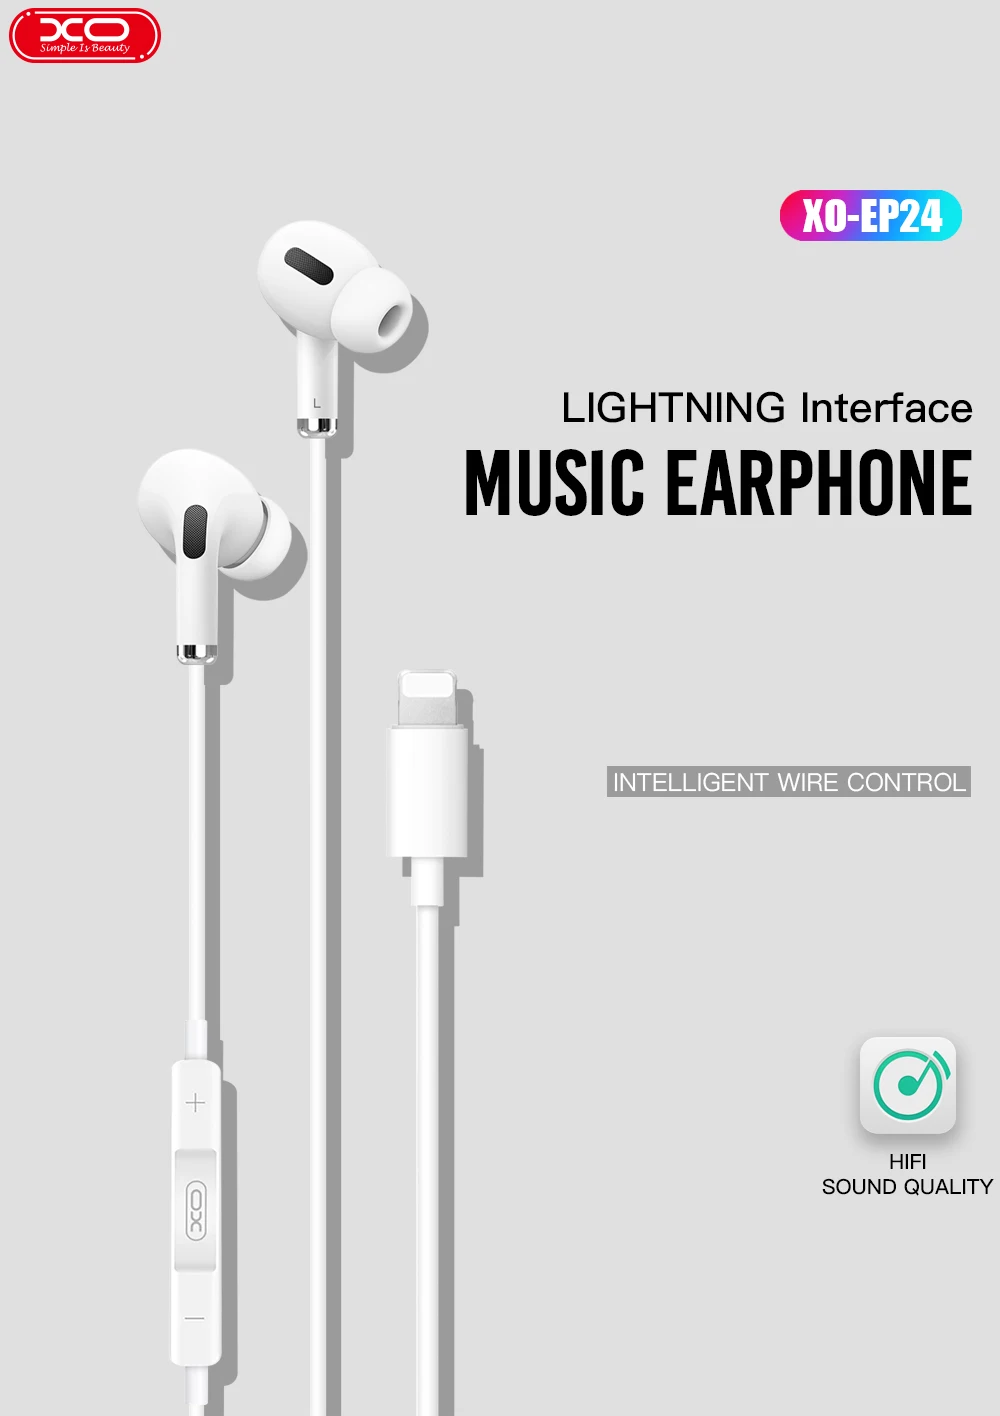 XO EP23 Type-C Interface 2020 Hot Sell Product Music Earphone In ear Earphone Quality Headset with Stereo Earphones for iPhone